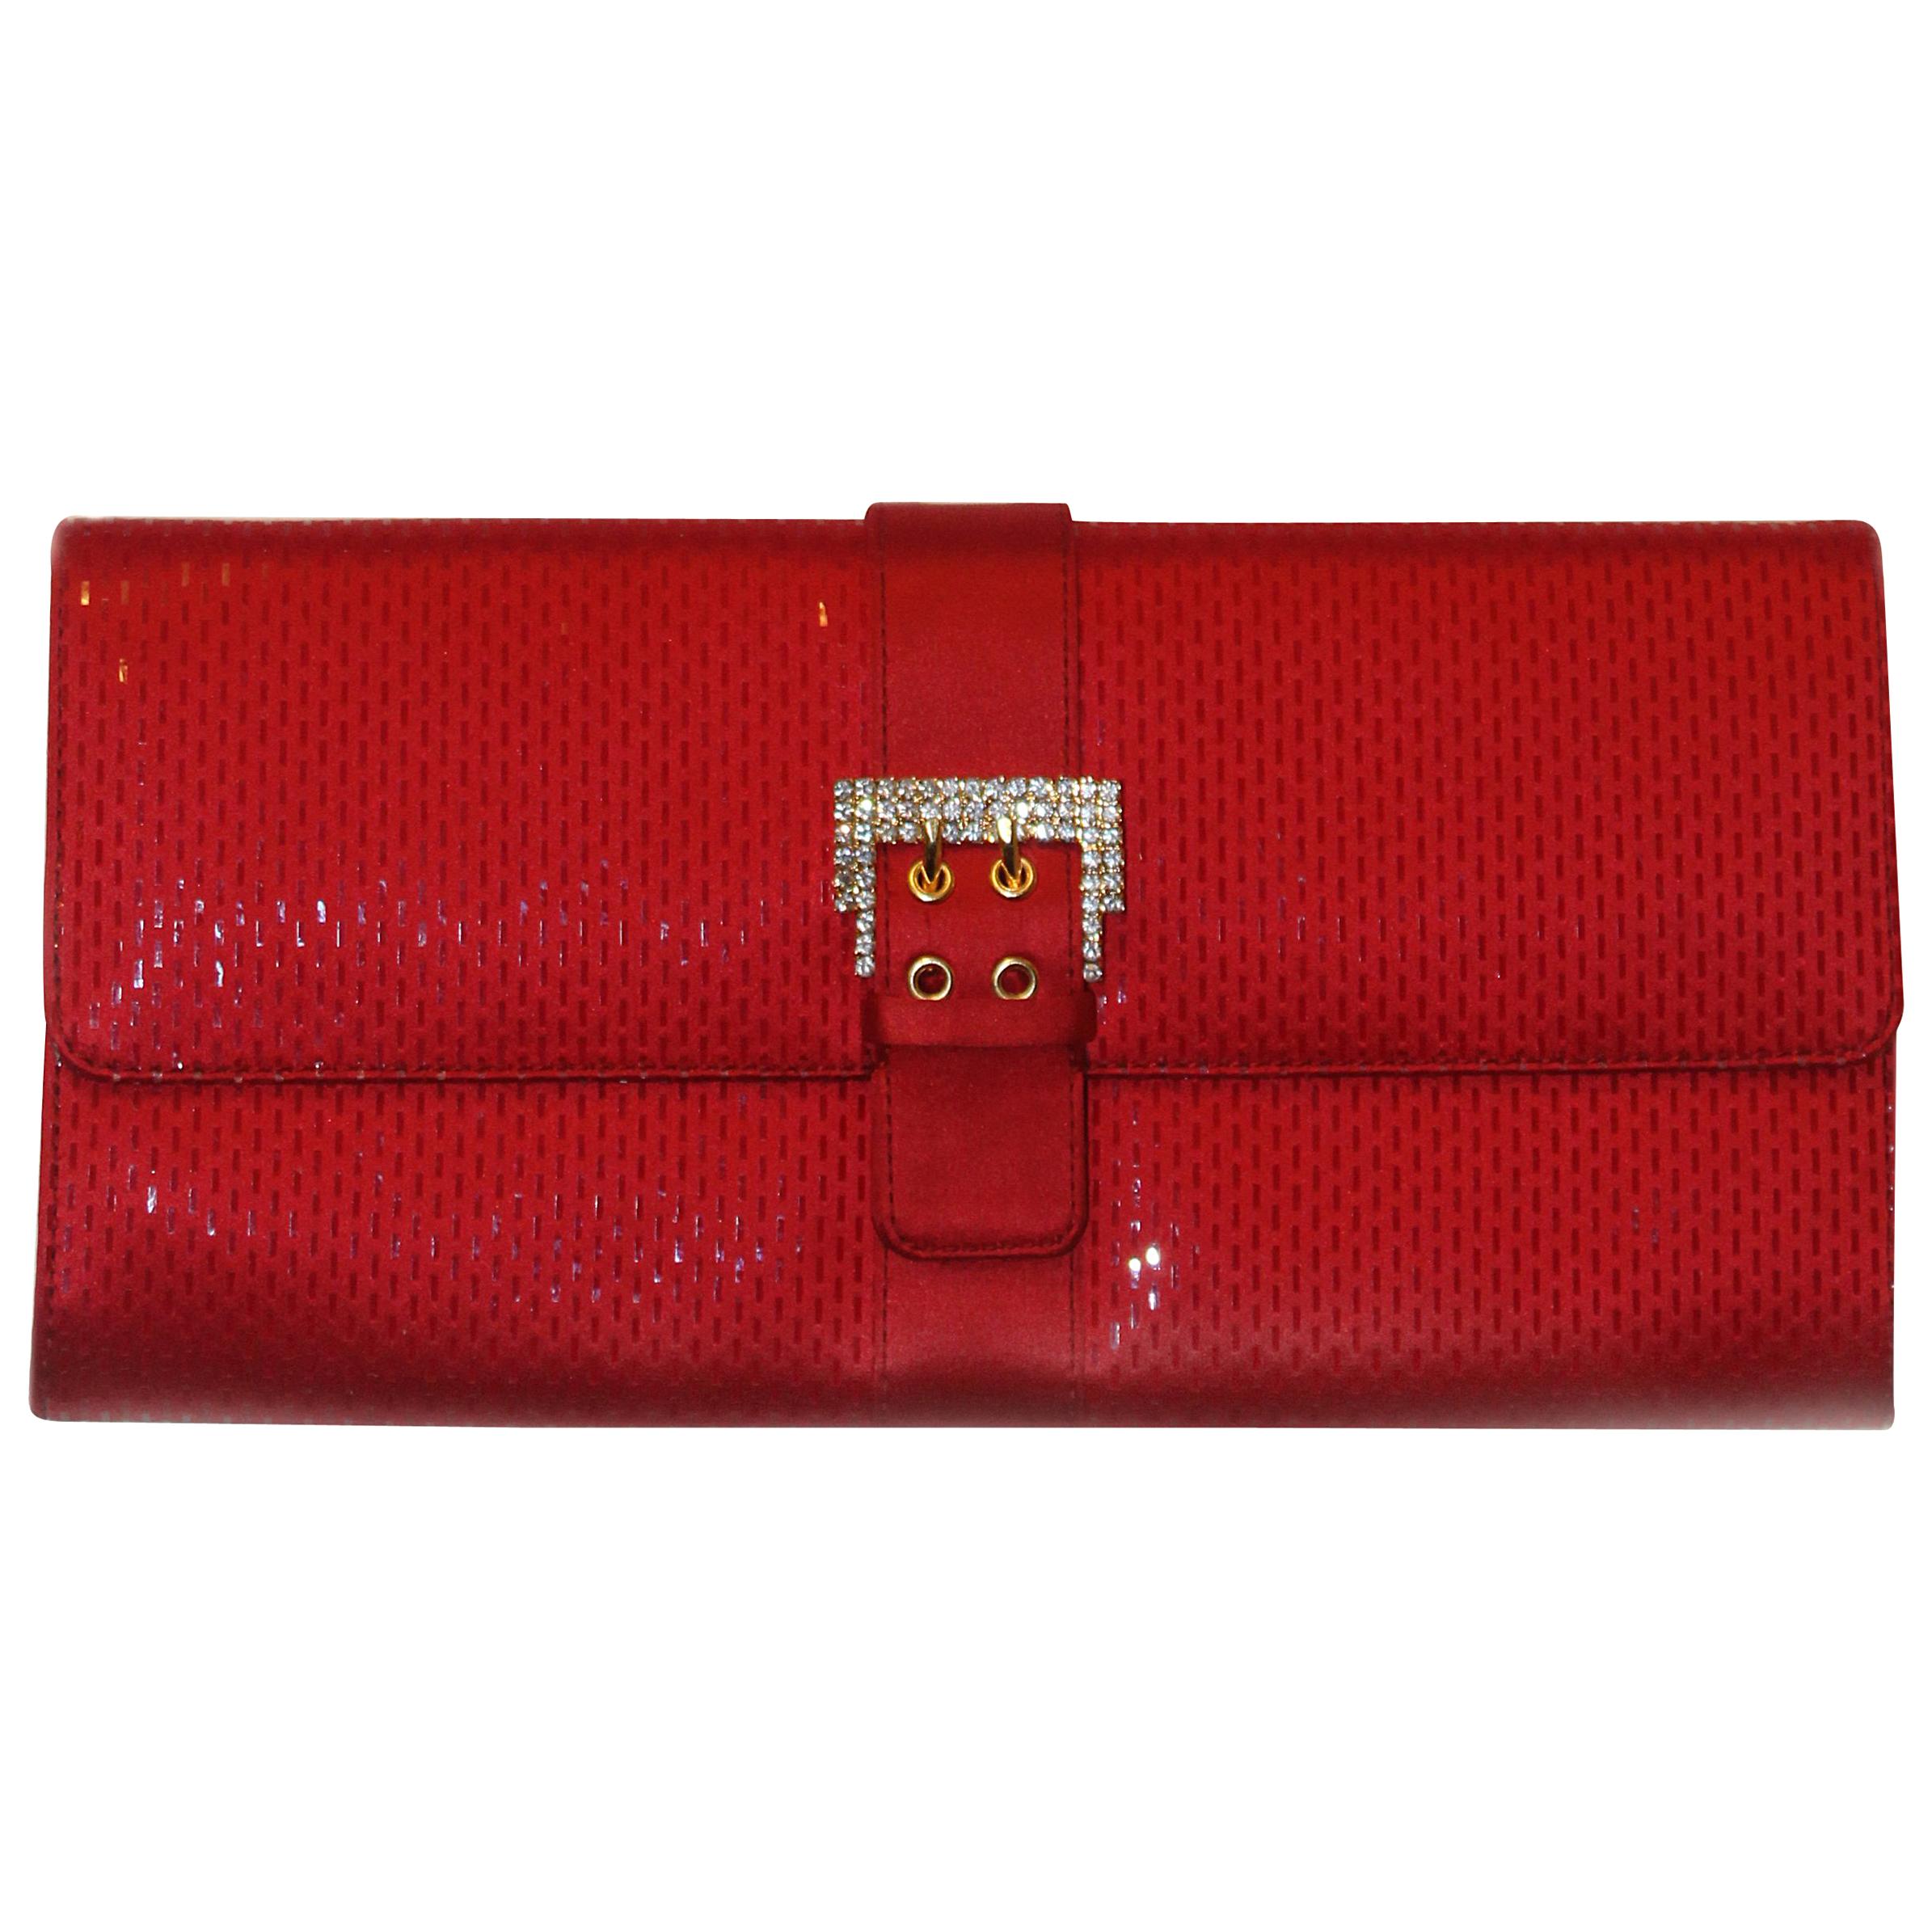 St John Red Sequined Satin Clutch W/ Crystal Buckle At Closure